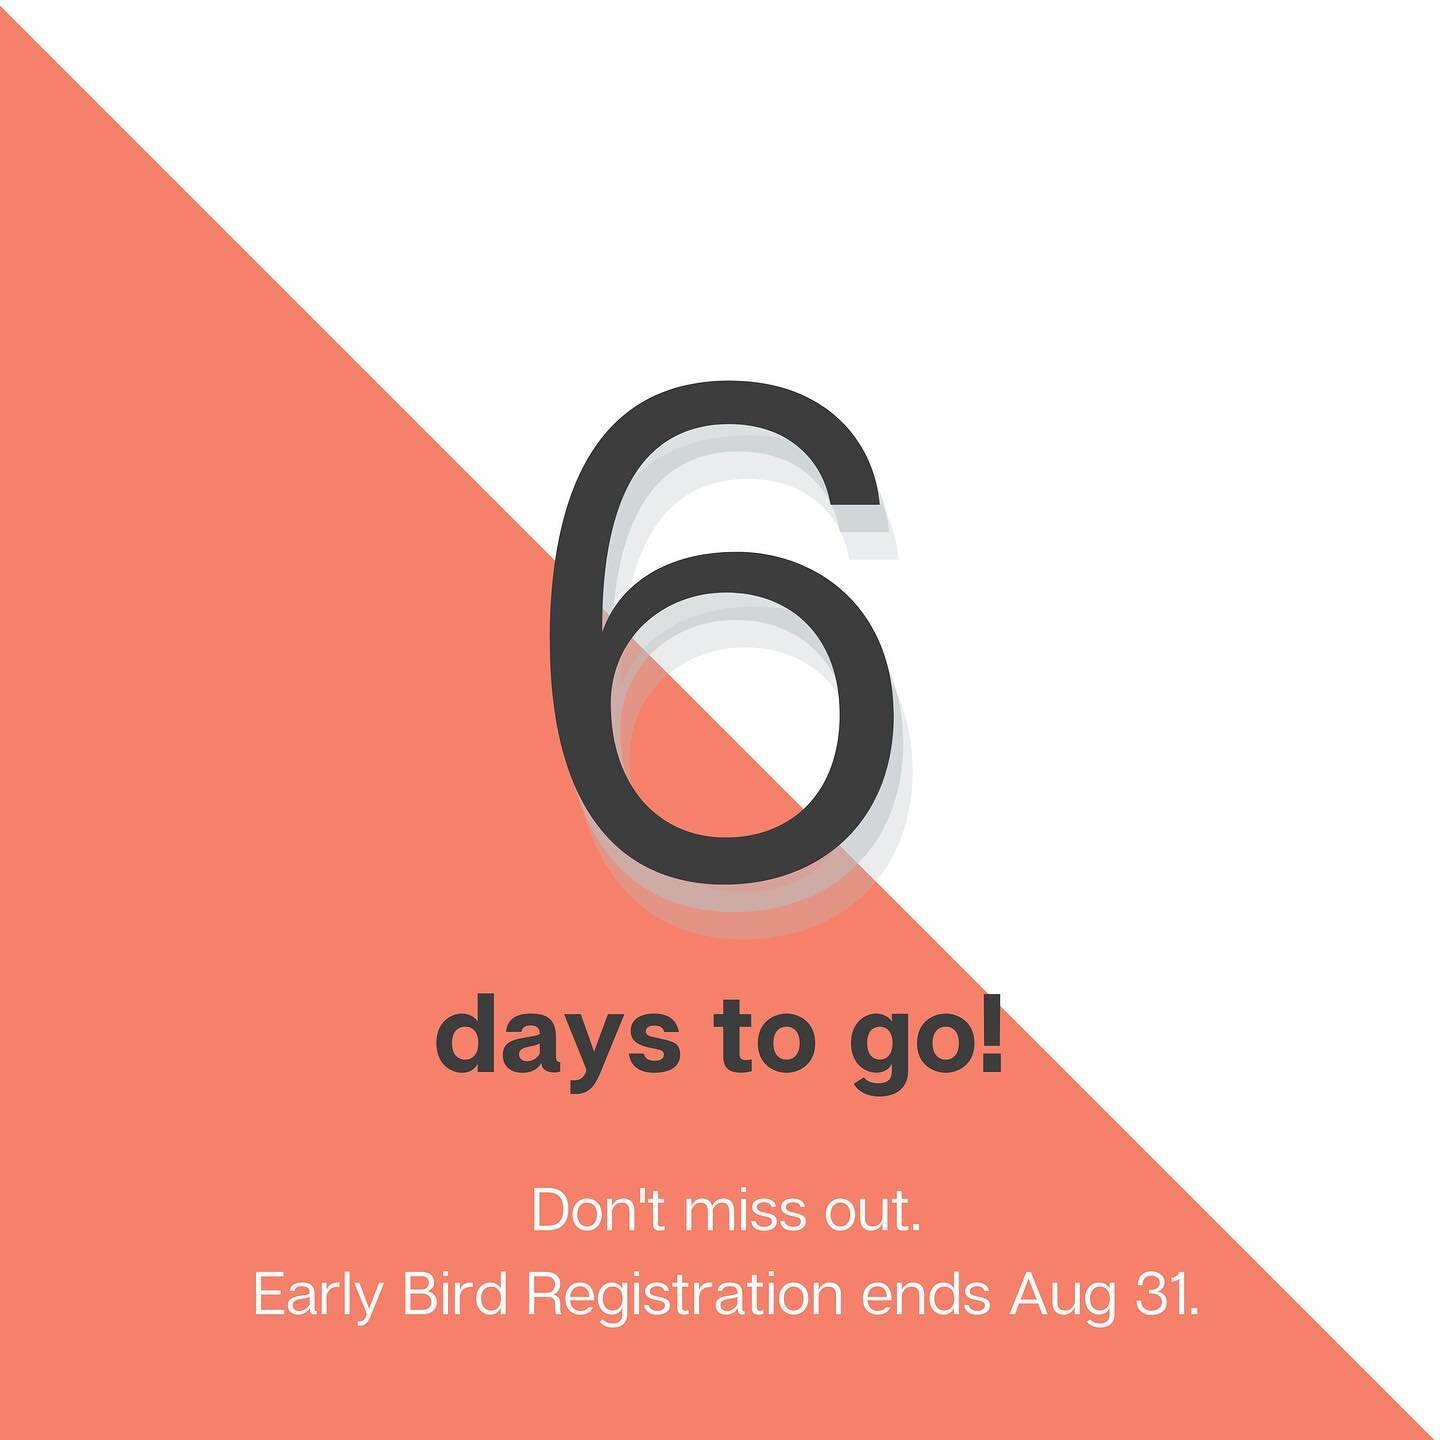 There are just 6 DAYS left to snag early bird pricing for The Leaders' Summit! 

Head over to the website to register and for more information about this year's theme, location, speakers, and ministry roundtables. There is something for everyone. 

R